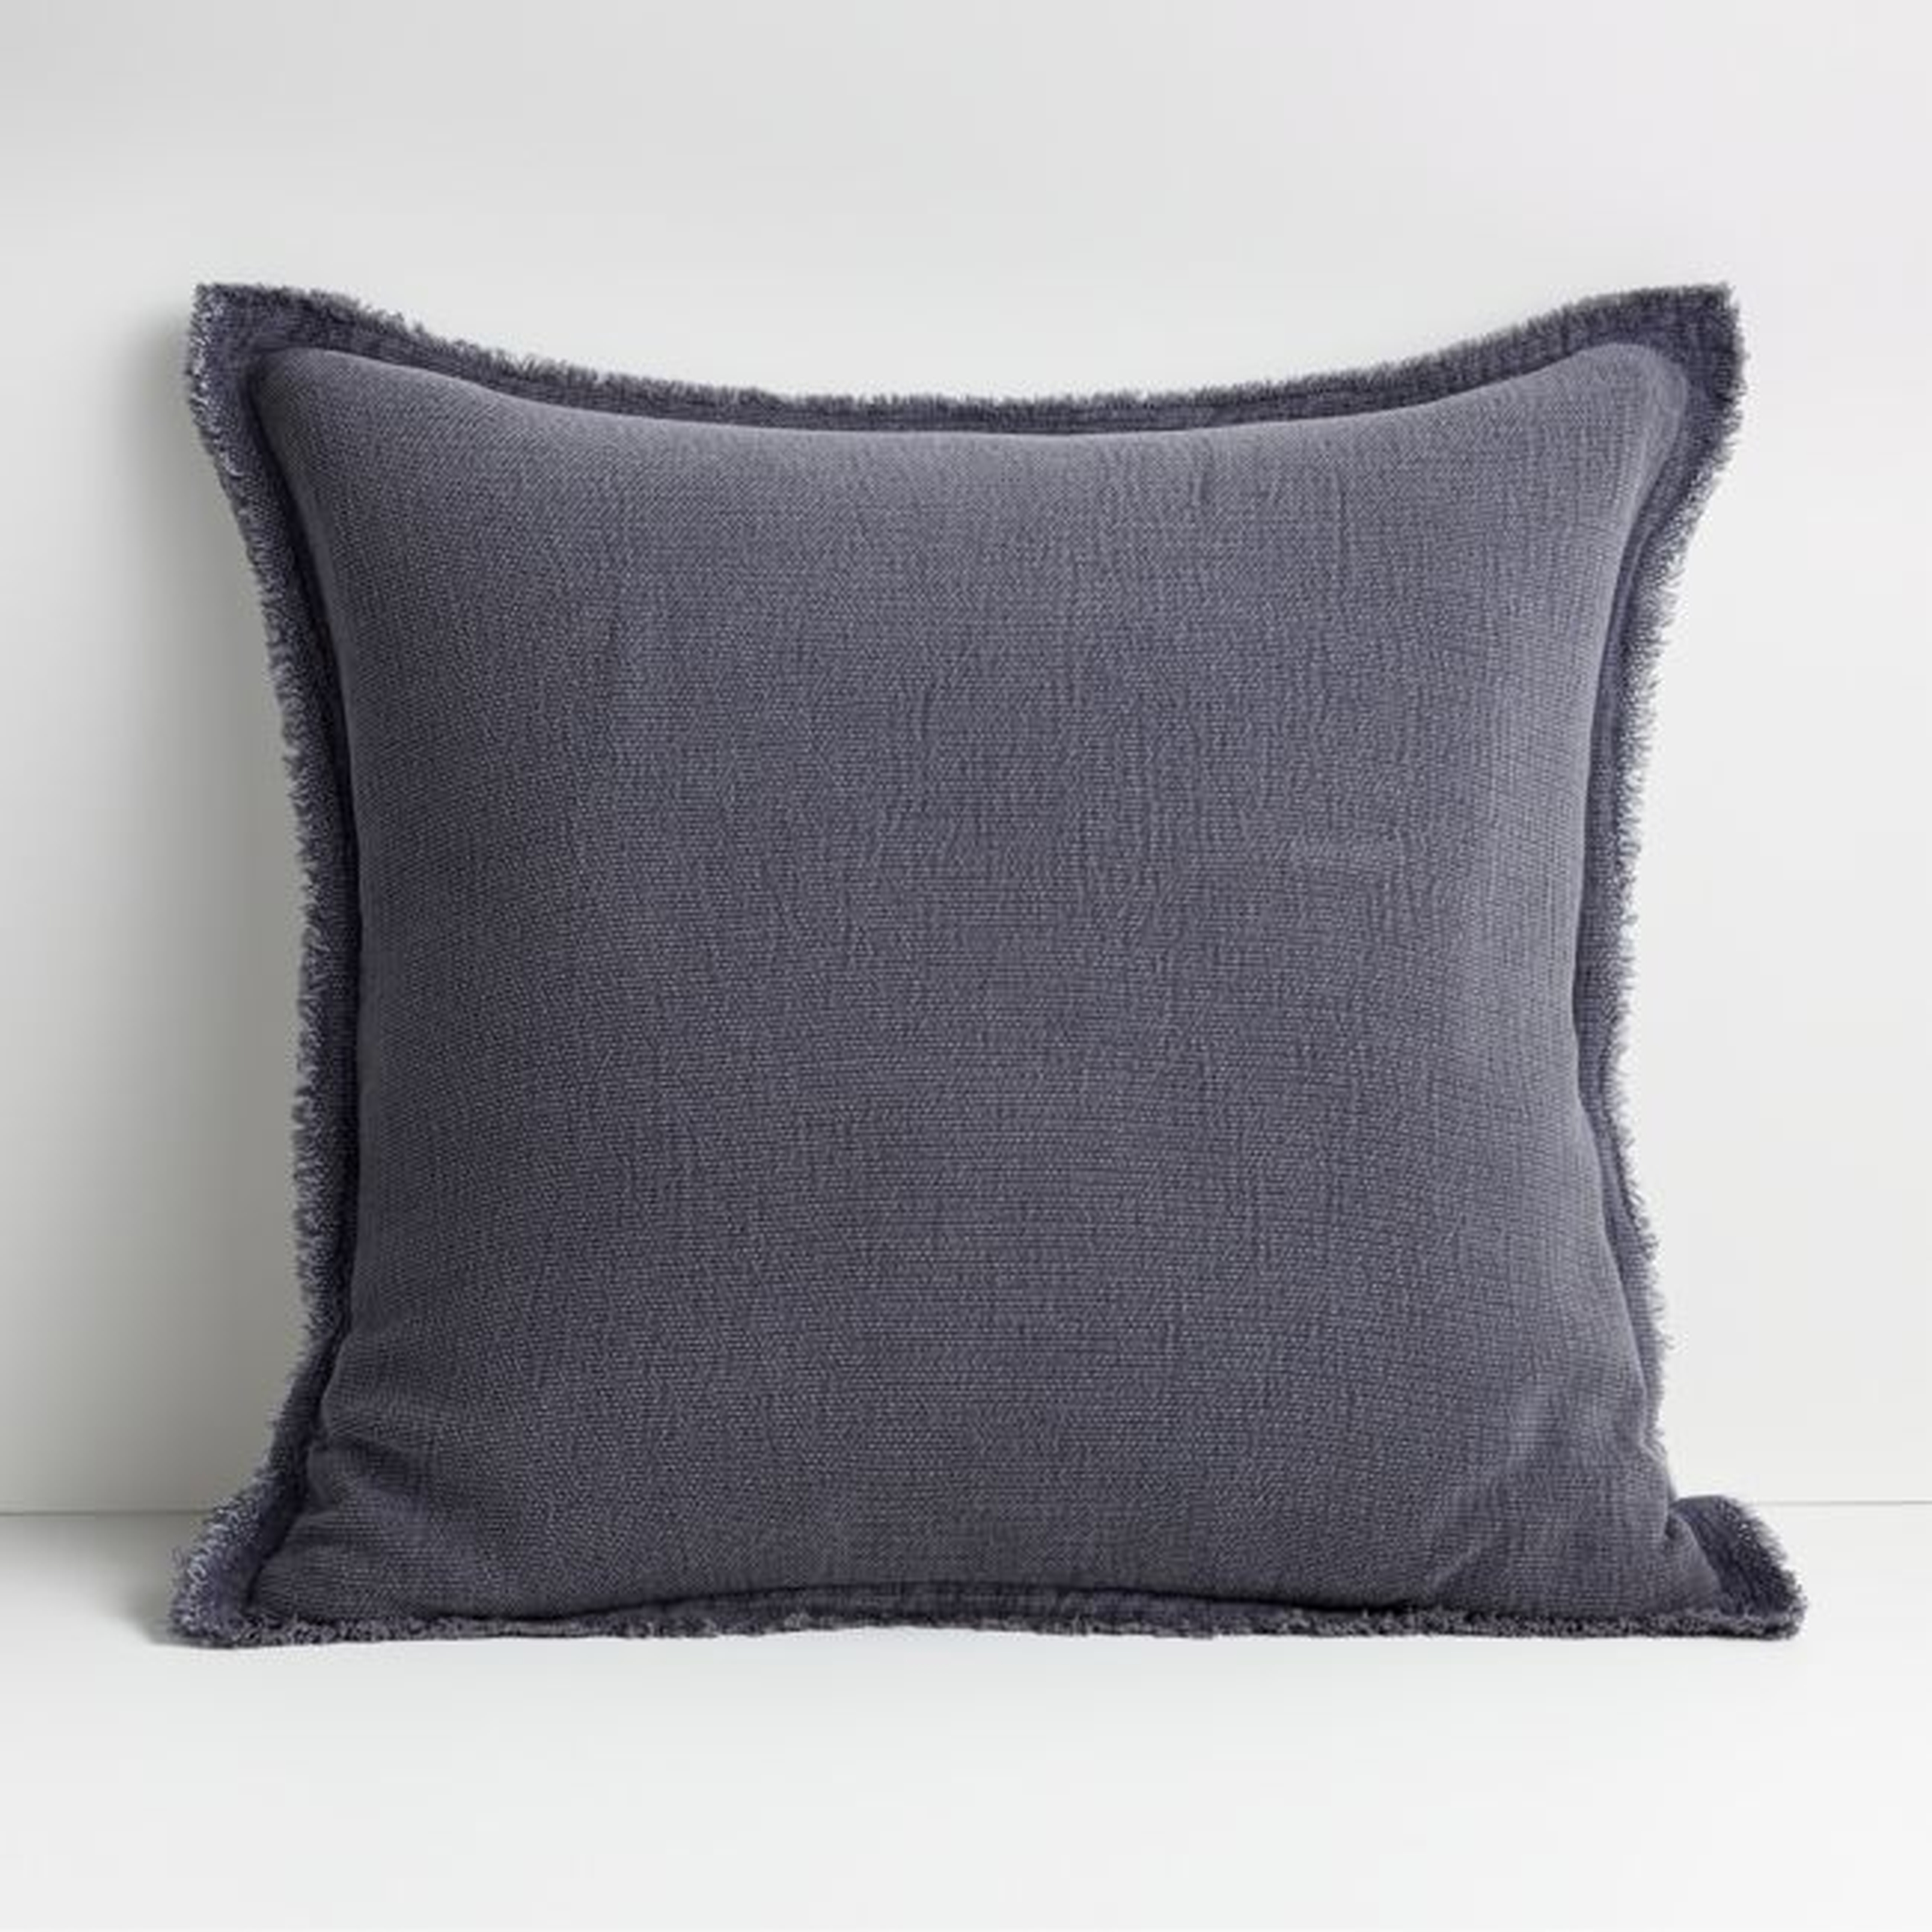 Olind Pillow with Down-Alternative Insert, Blue, 23" x 23" - Crate and Barrel